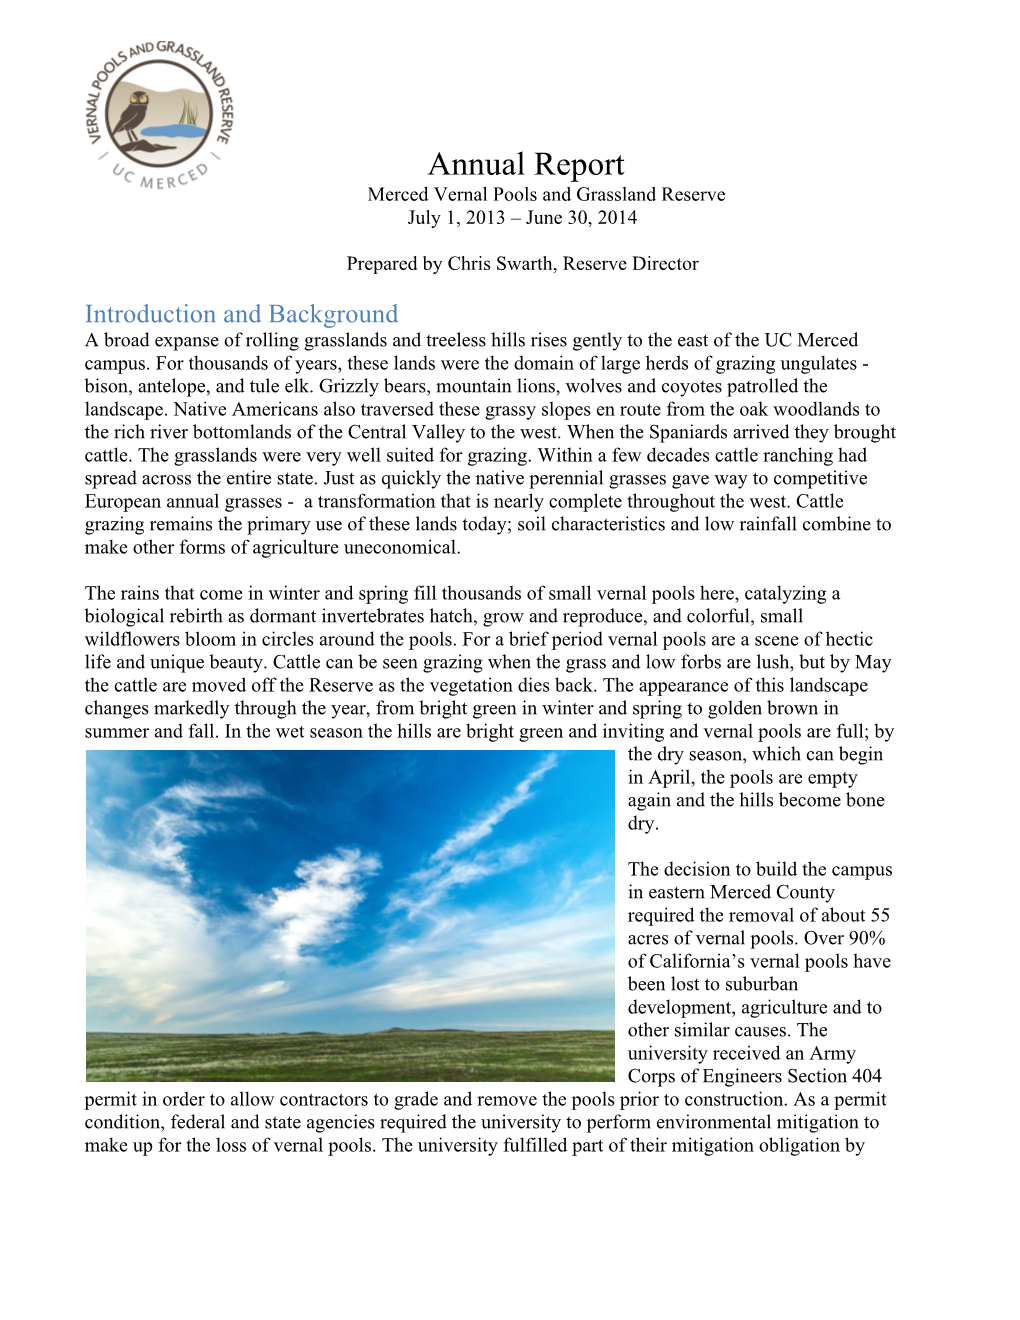 Annual Report Merced Vernal Pools and Grassland Reserve July 1, 2013 – June 30, 2014